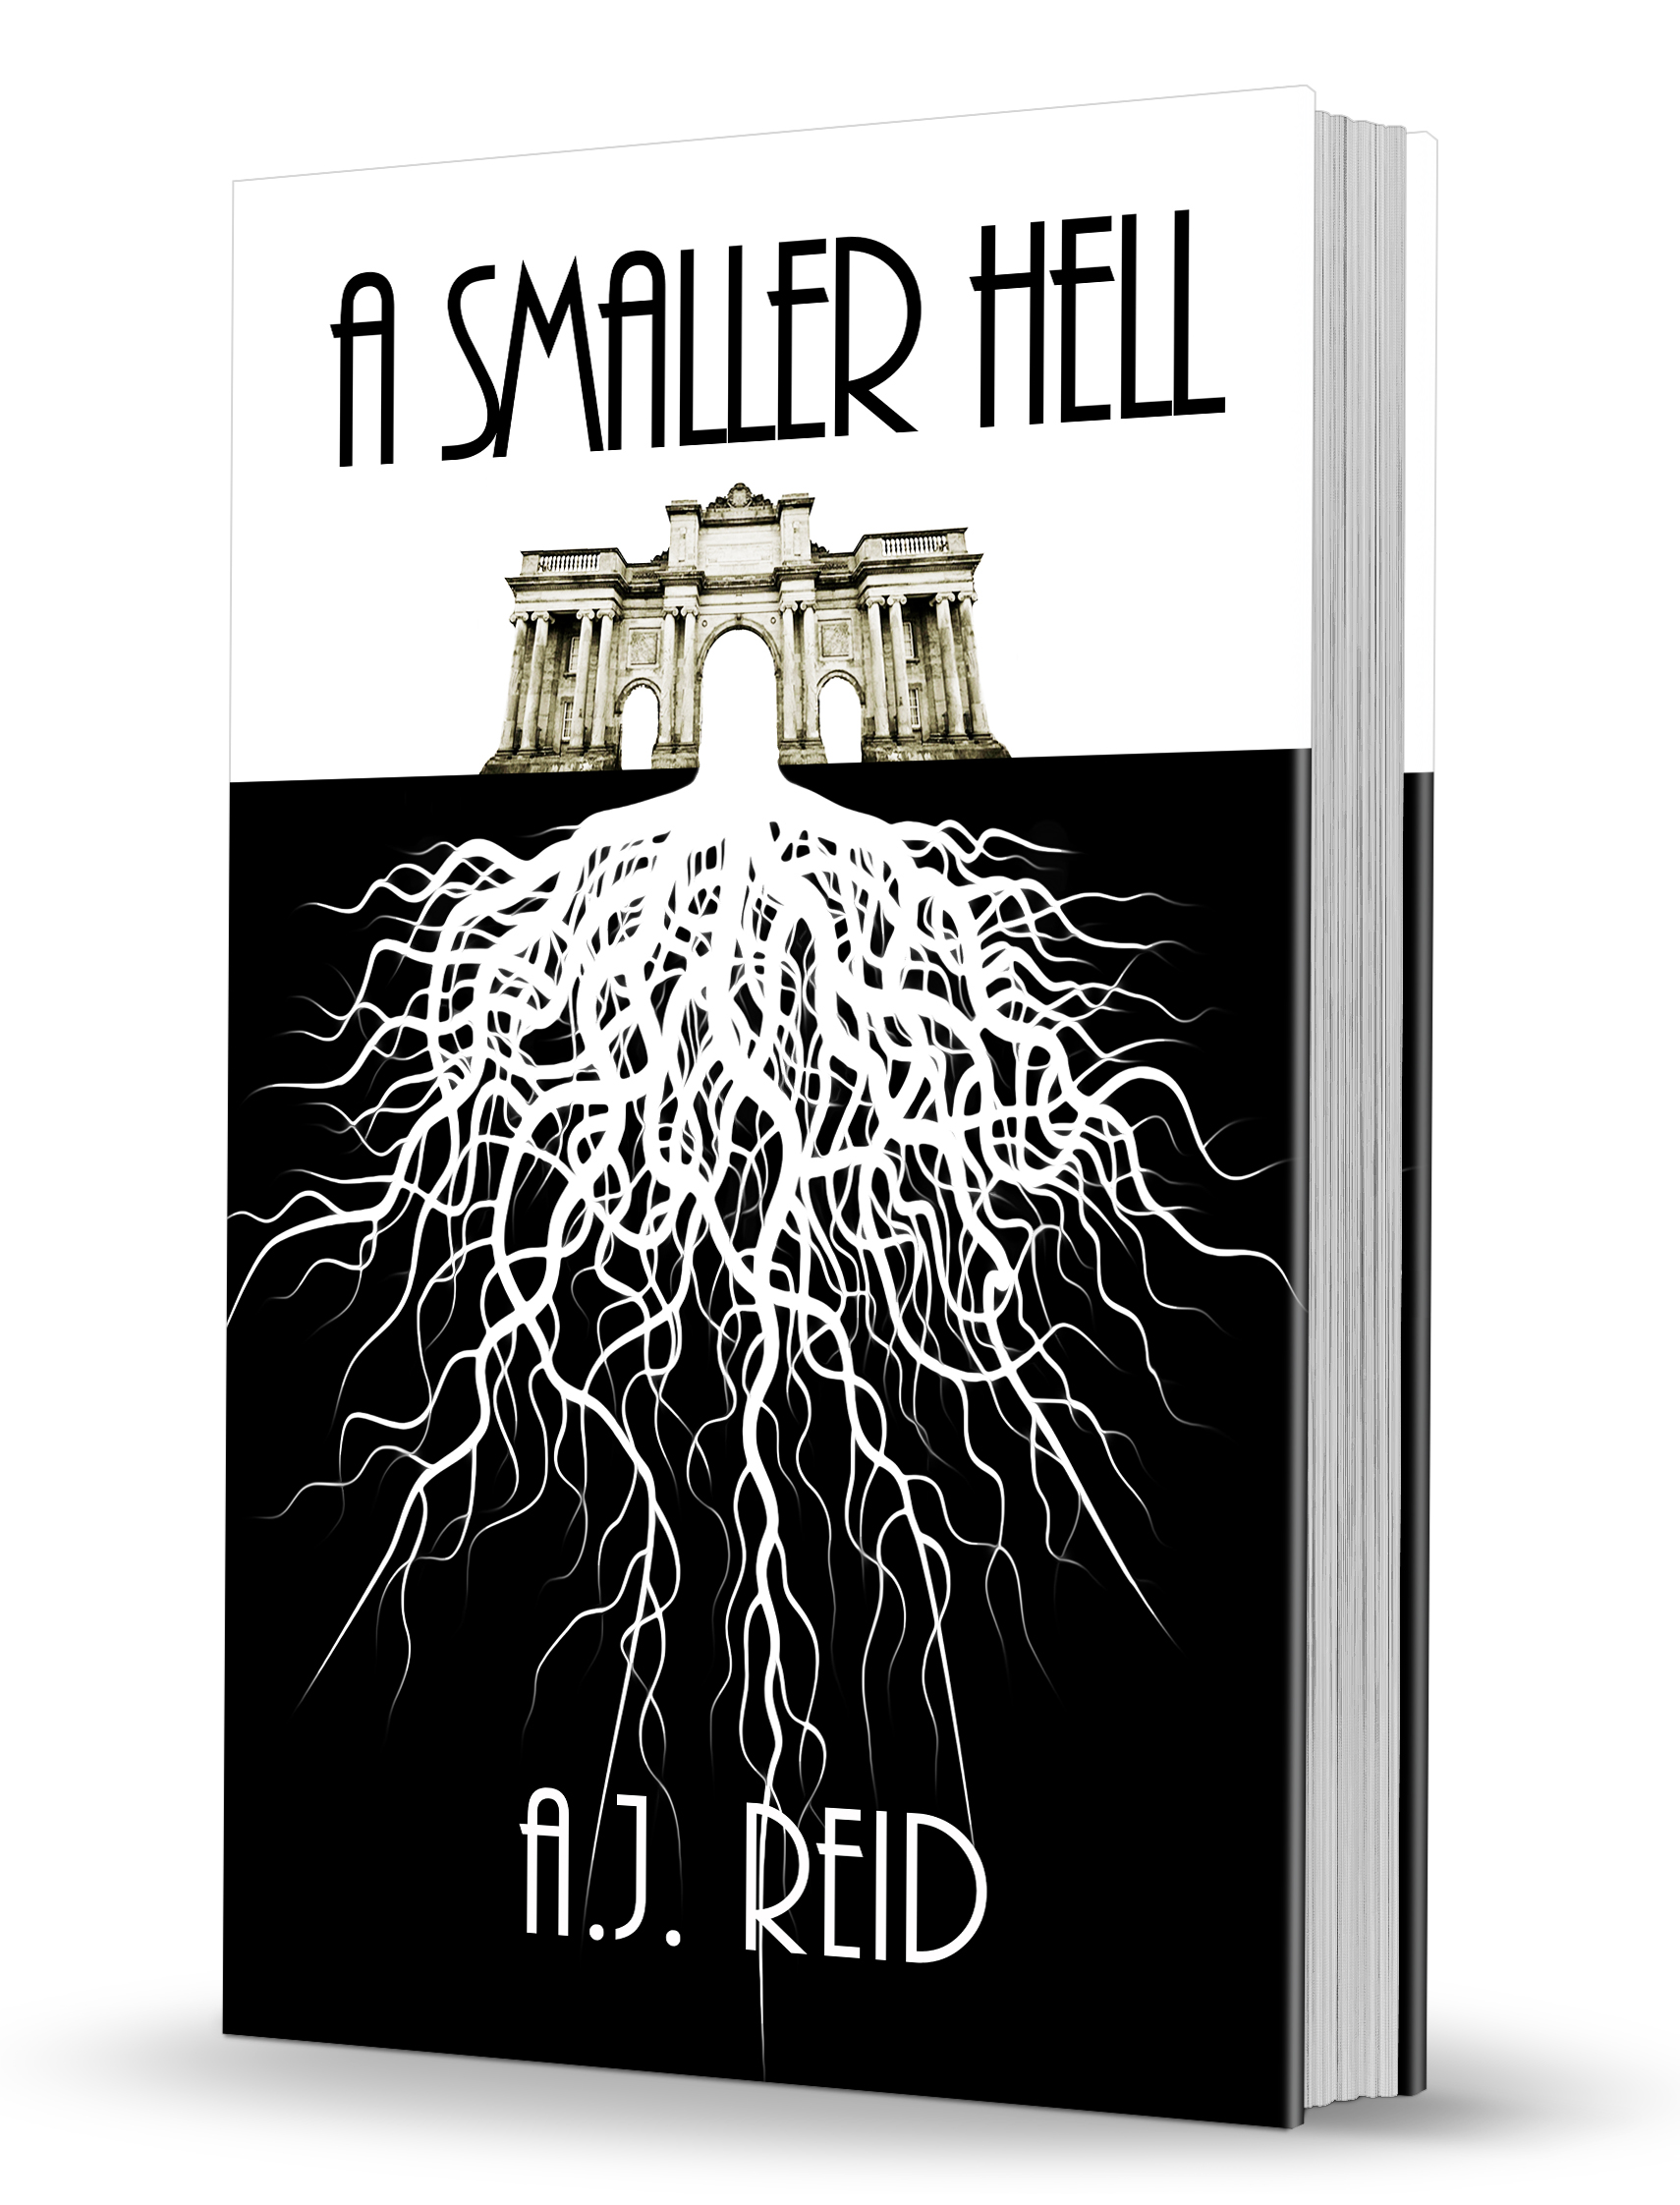 Promo Ends at Midnight: Get your Free Download of Brit-Grit Dark Comedy A Smaller Hell Now